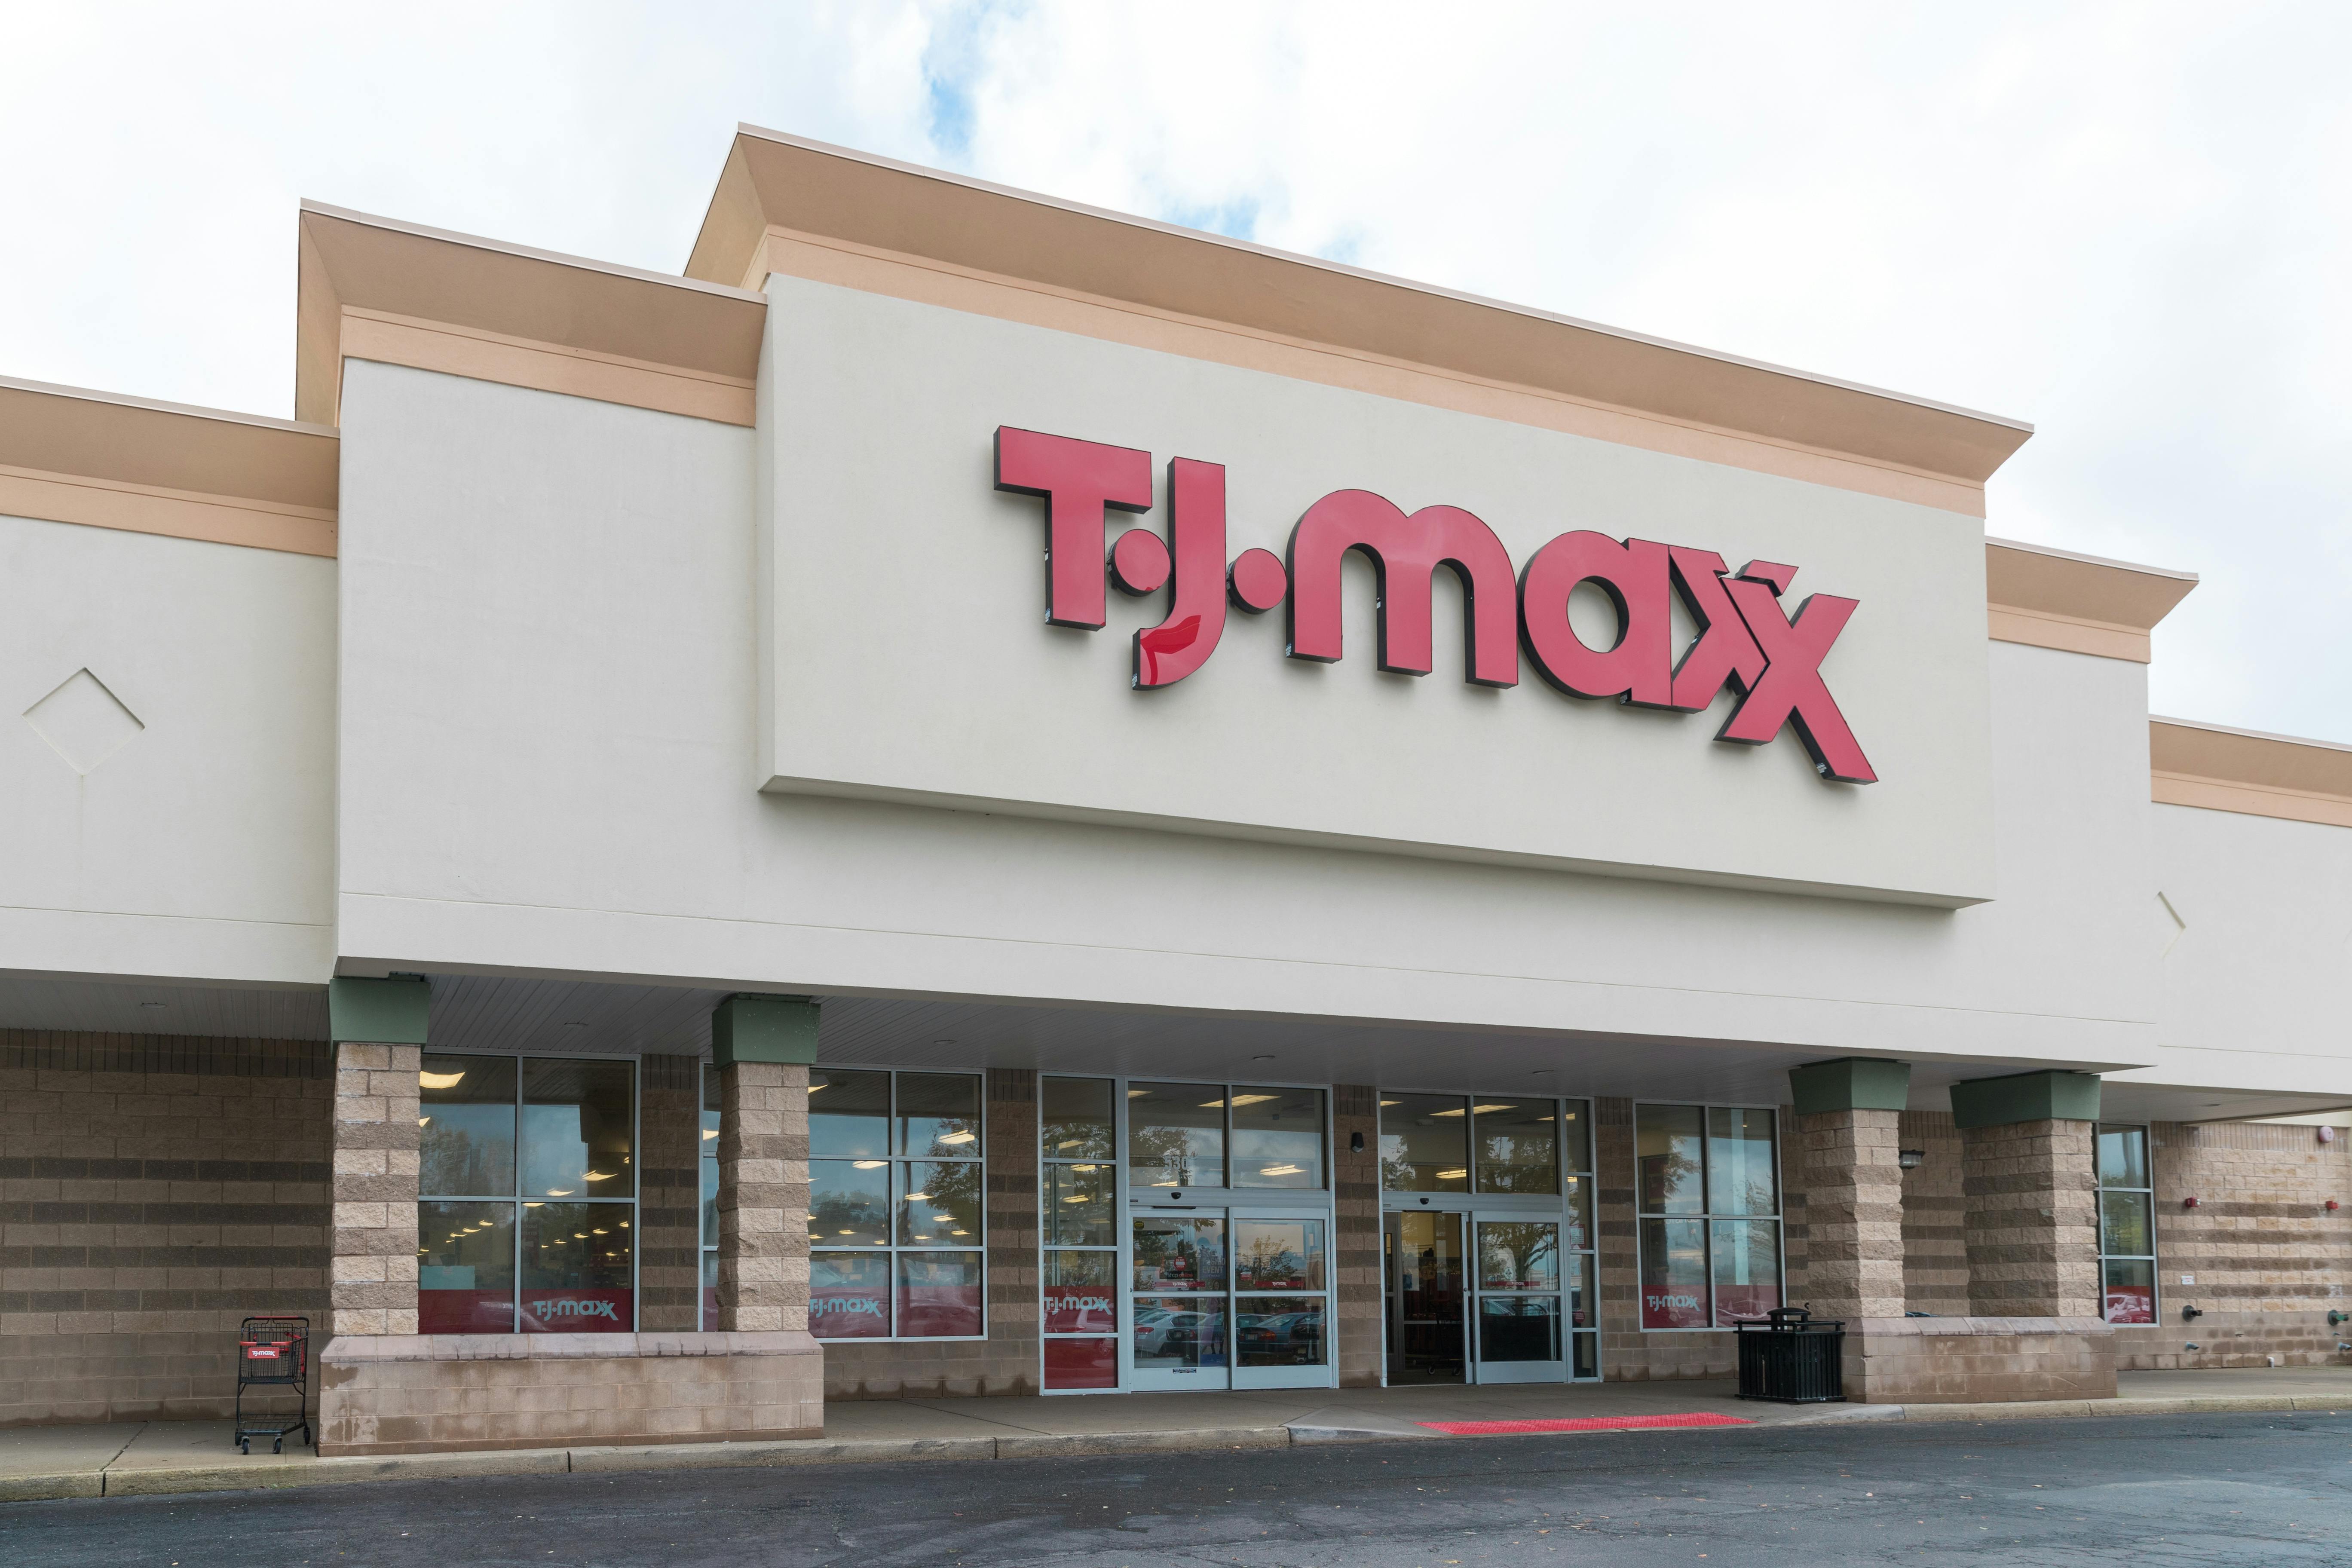 You Can Shop at TJ Maxx Online – SheKnows